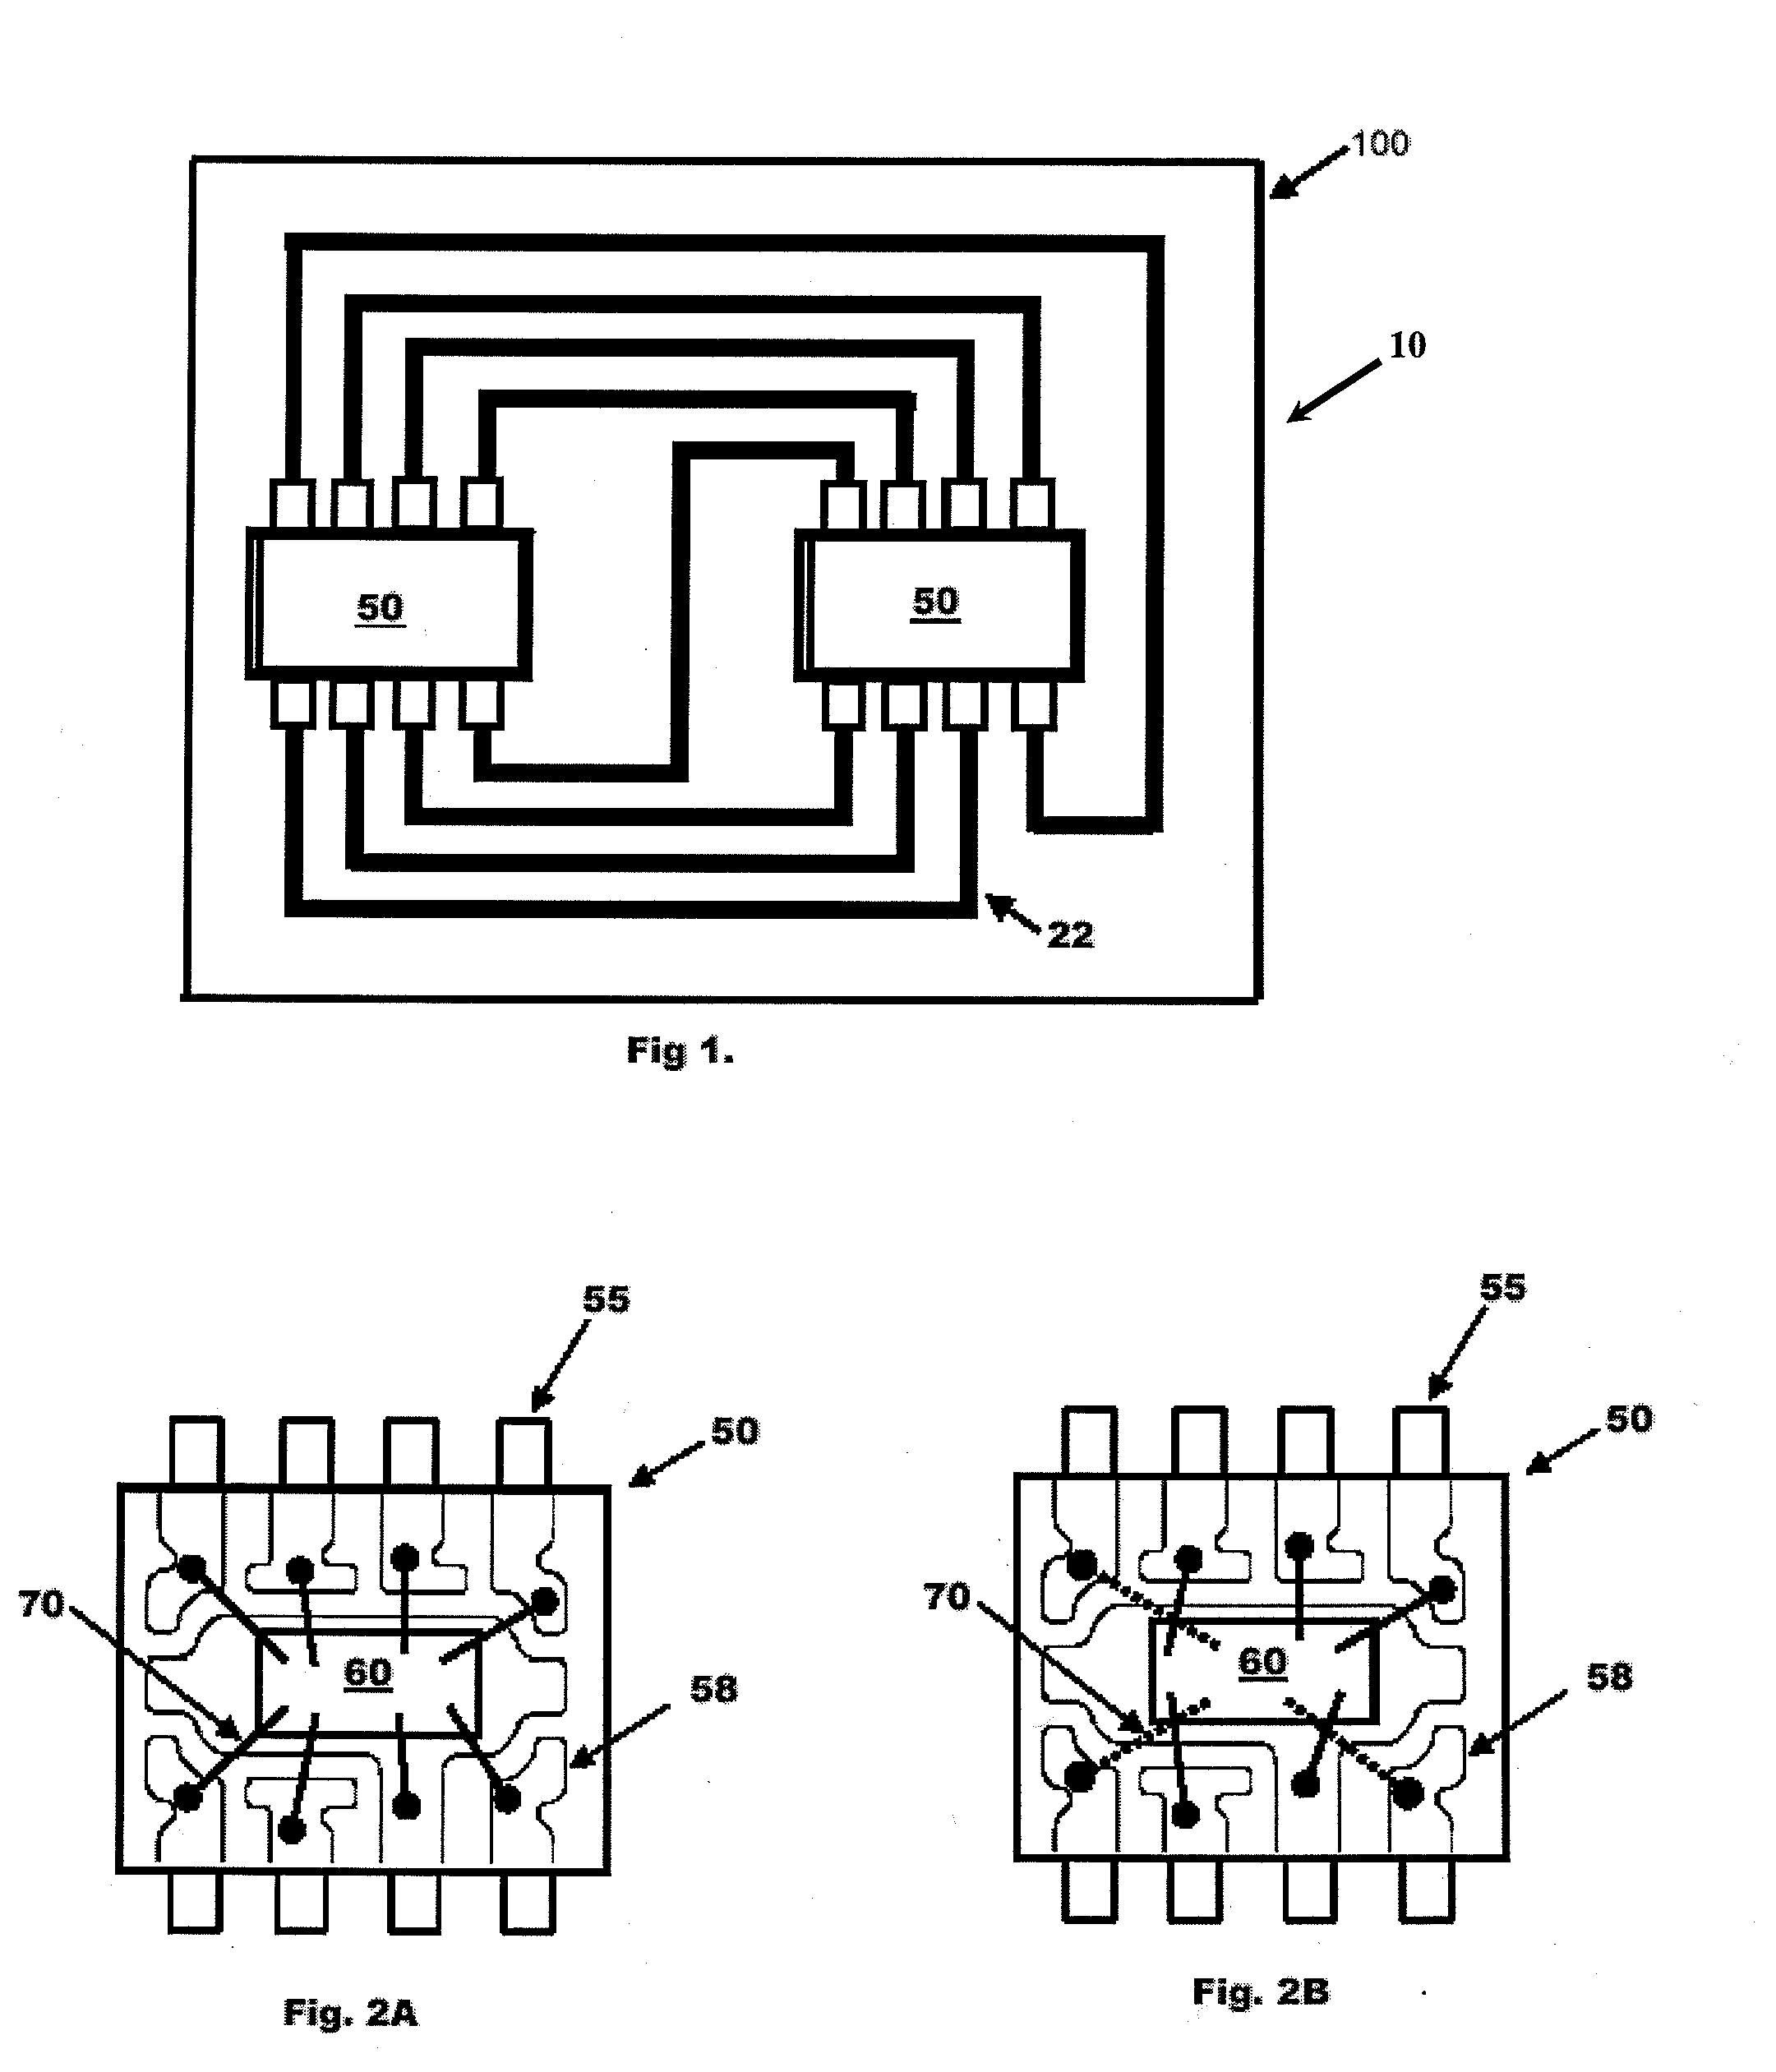 Simultaneous design of integrated circuit and printed circuit board